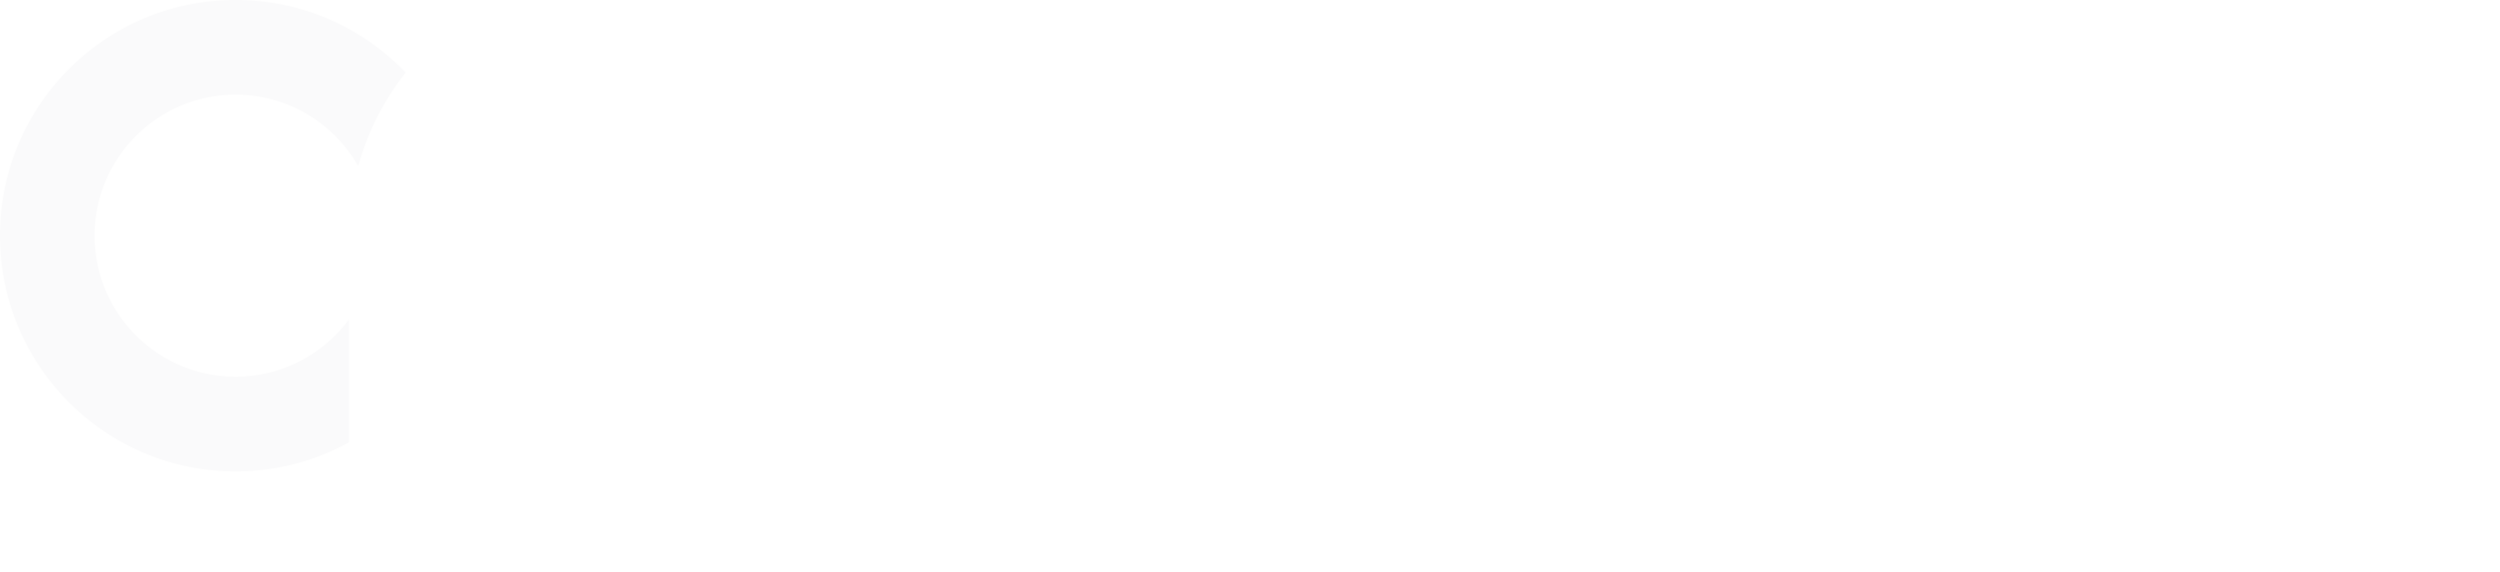 Columbia Packaging Group